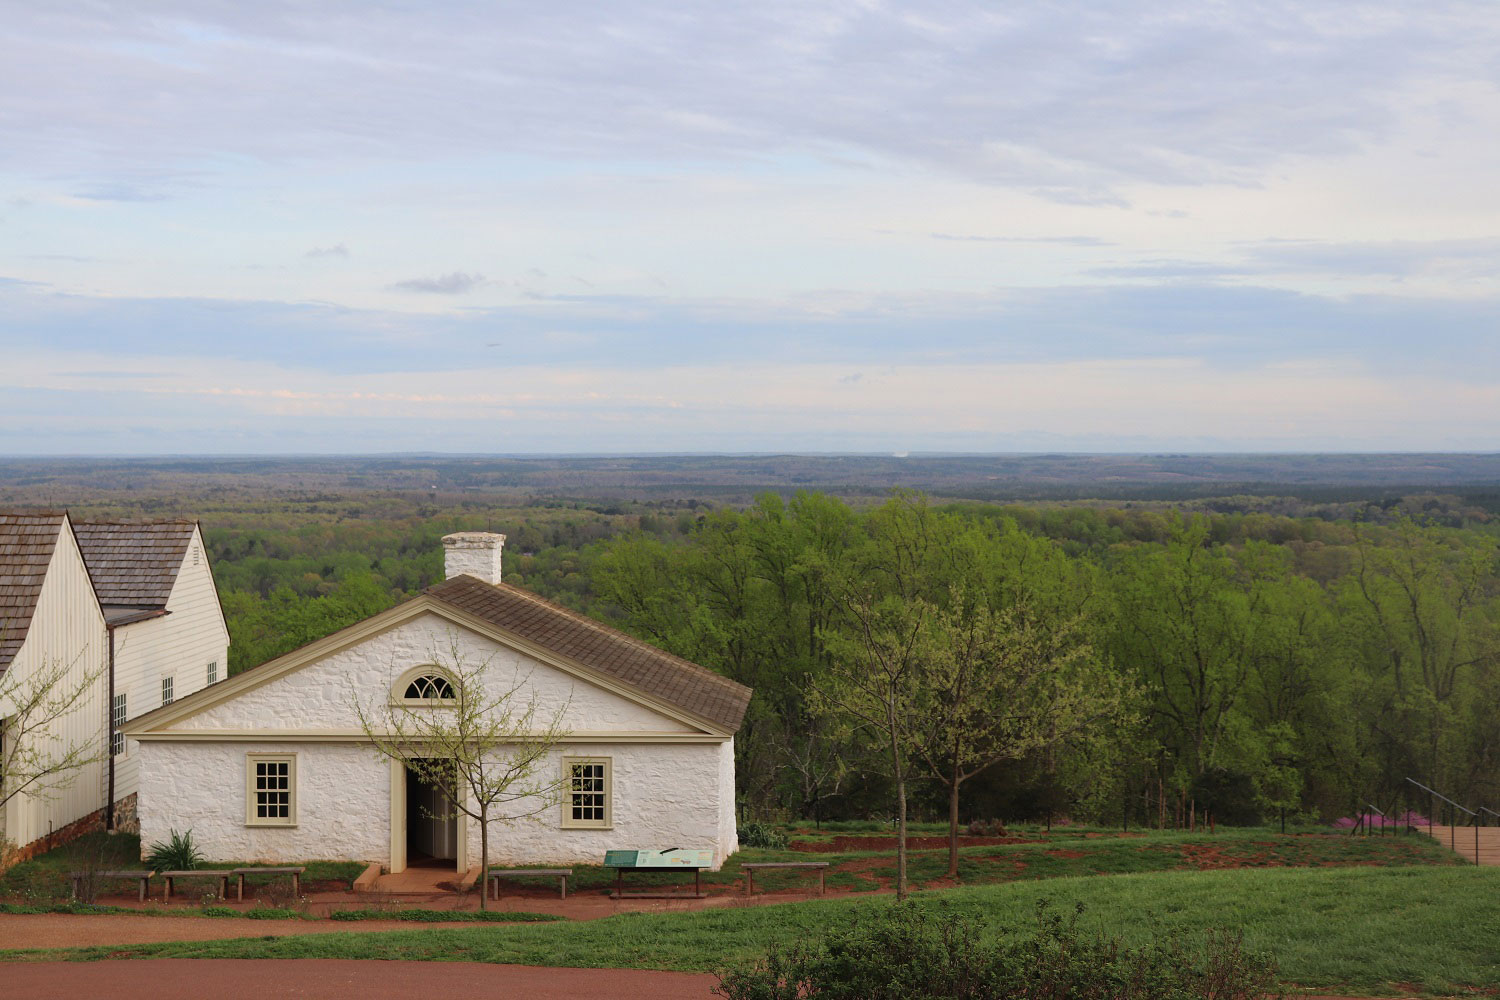 The Grounds of Monticello